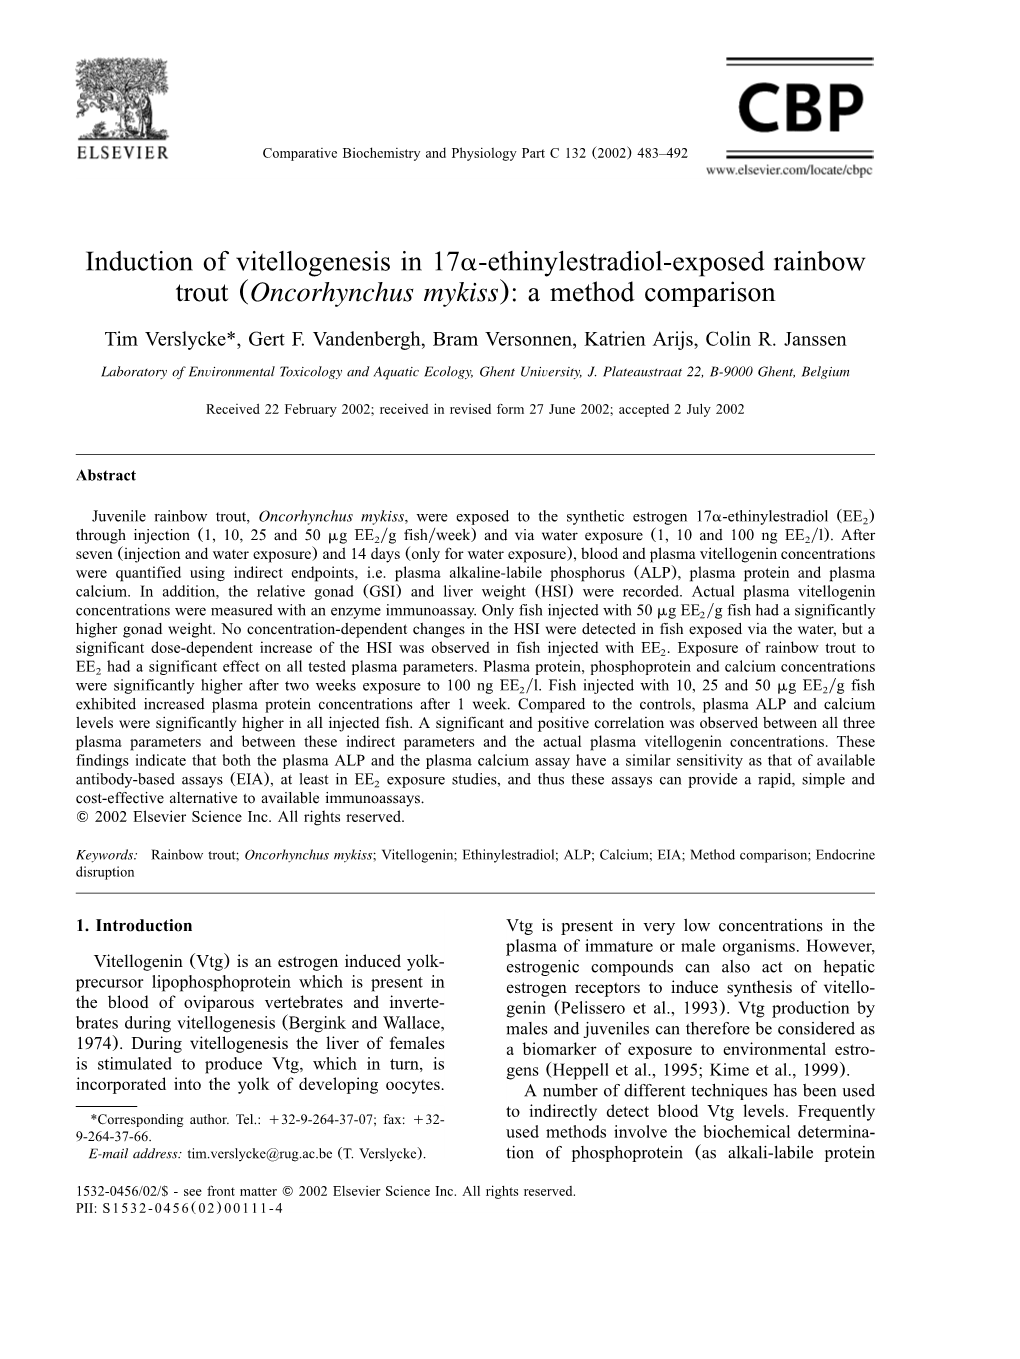 Induction of Vitellogenesis in 17A-Ethinylestradiol-Exposed Rainbow Trout (Oncorhynchus Mykiss): a Method Comparison